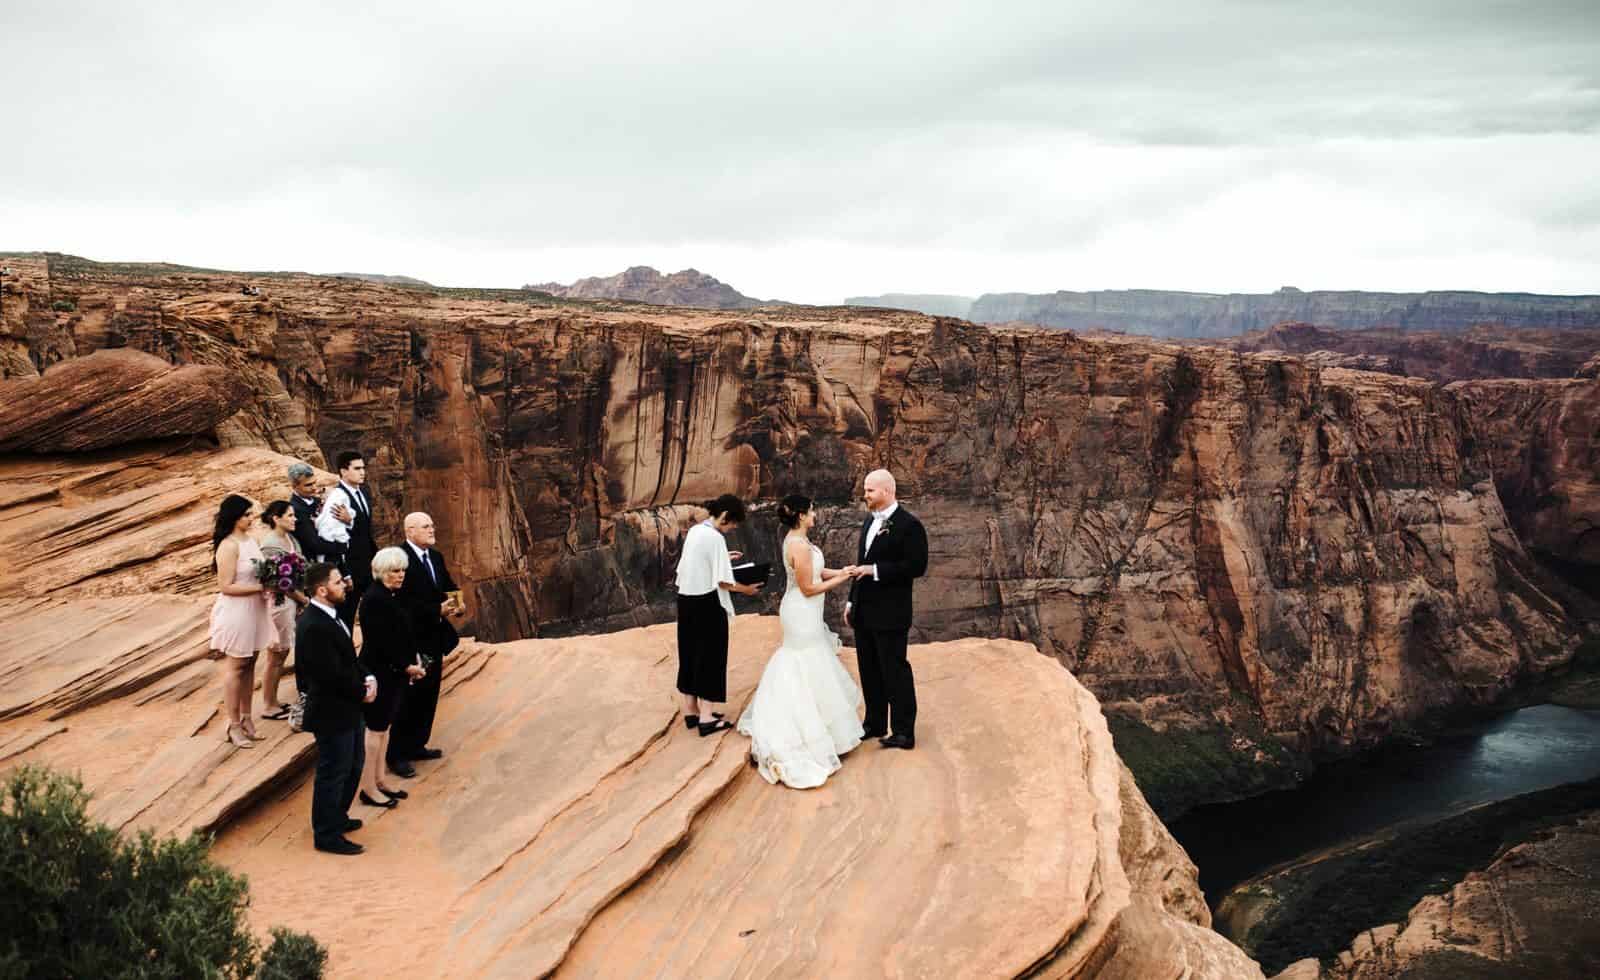 Standing together with family during their ceremony at Horseshohe bend for their Destination Wedding